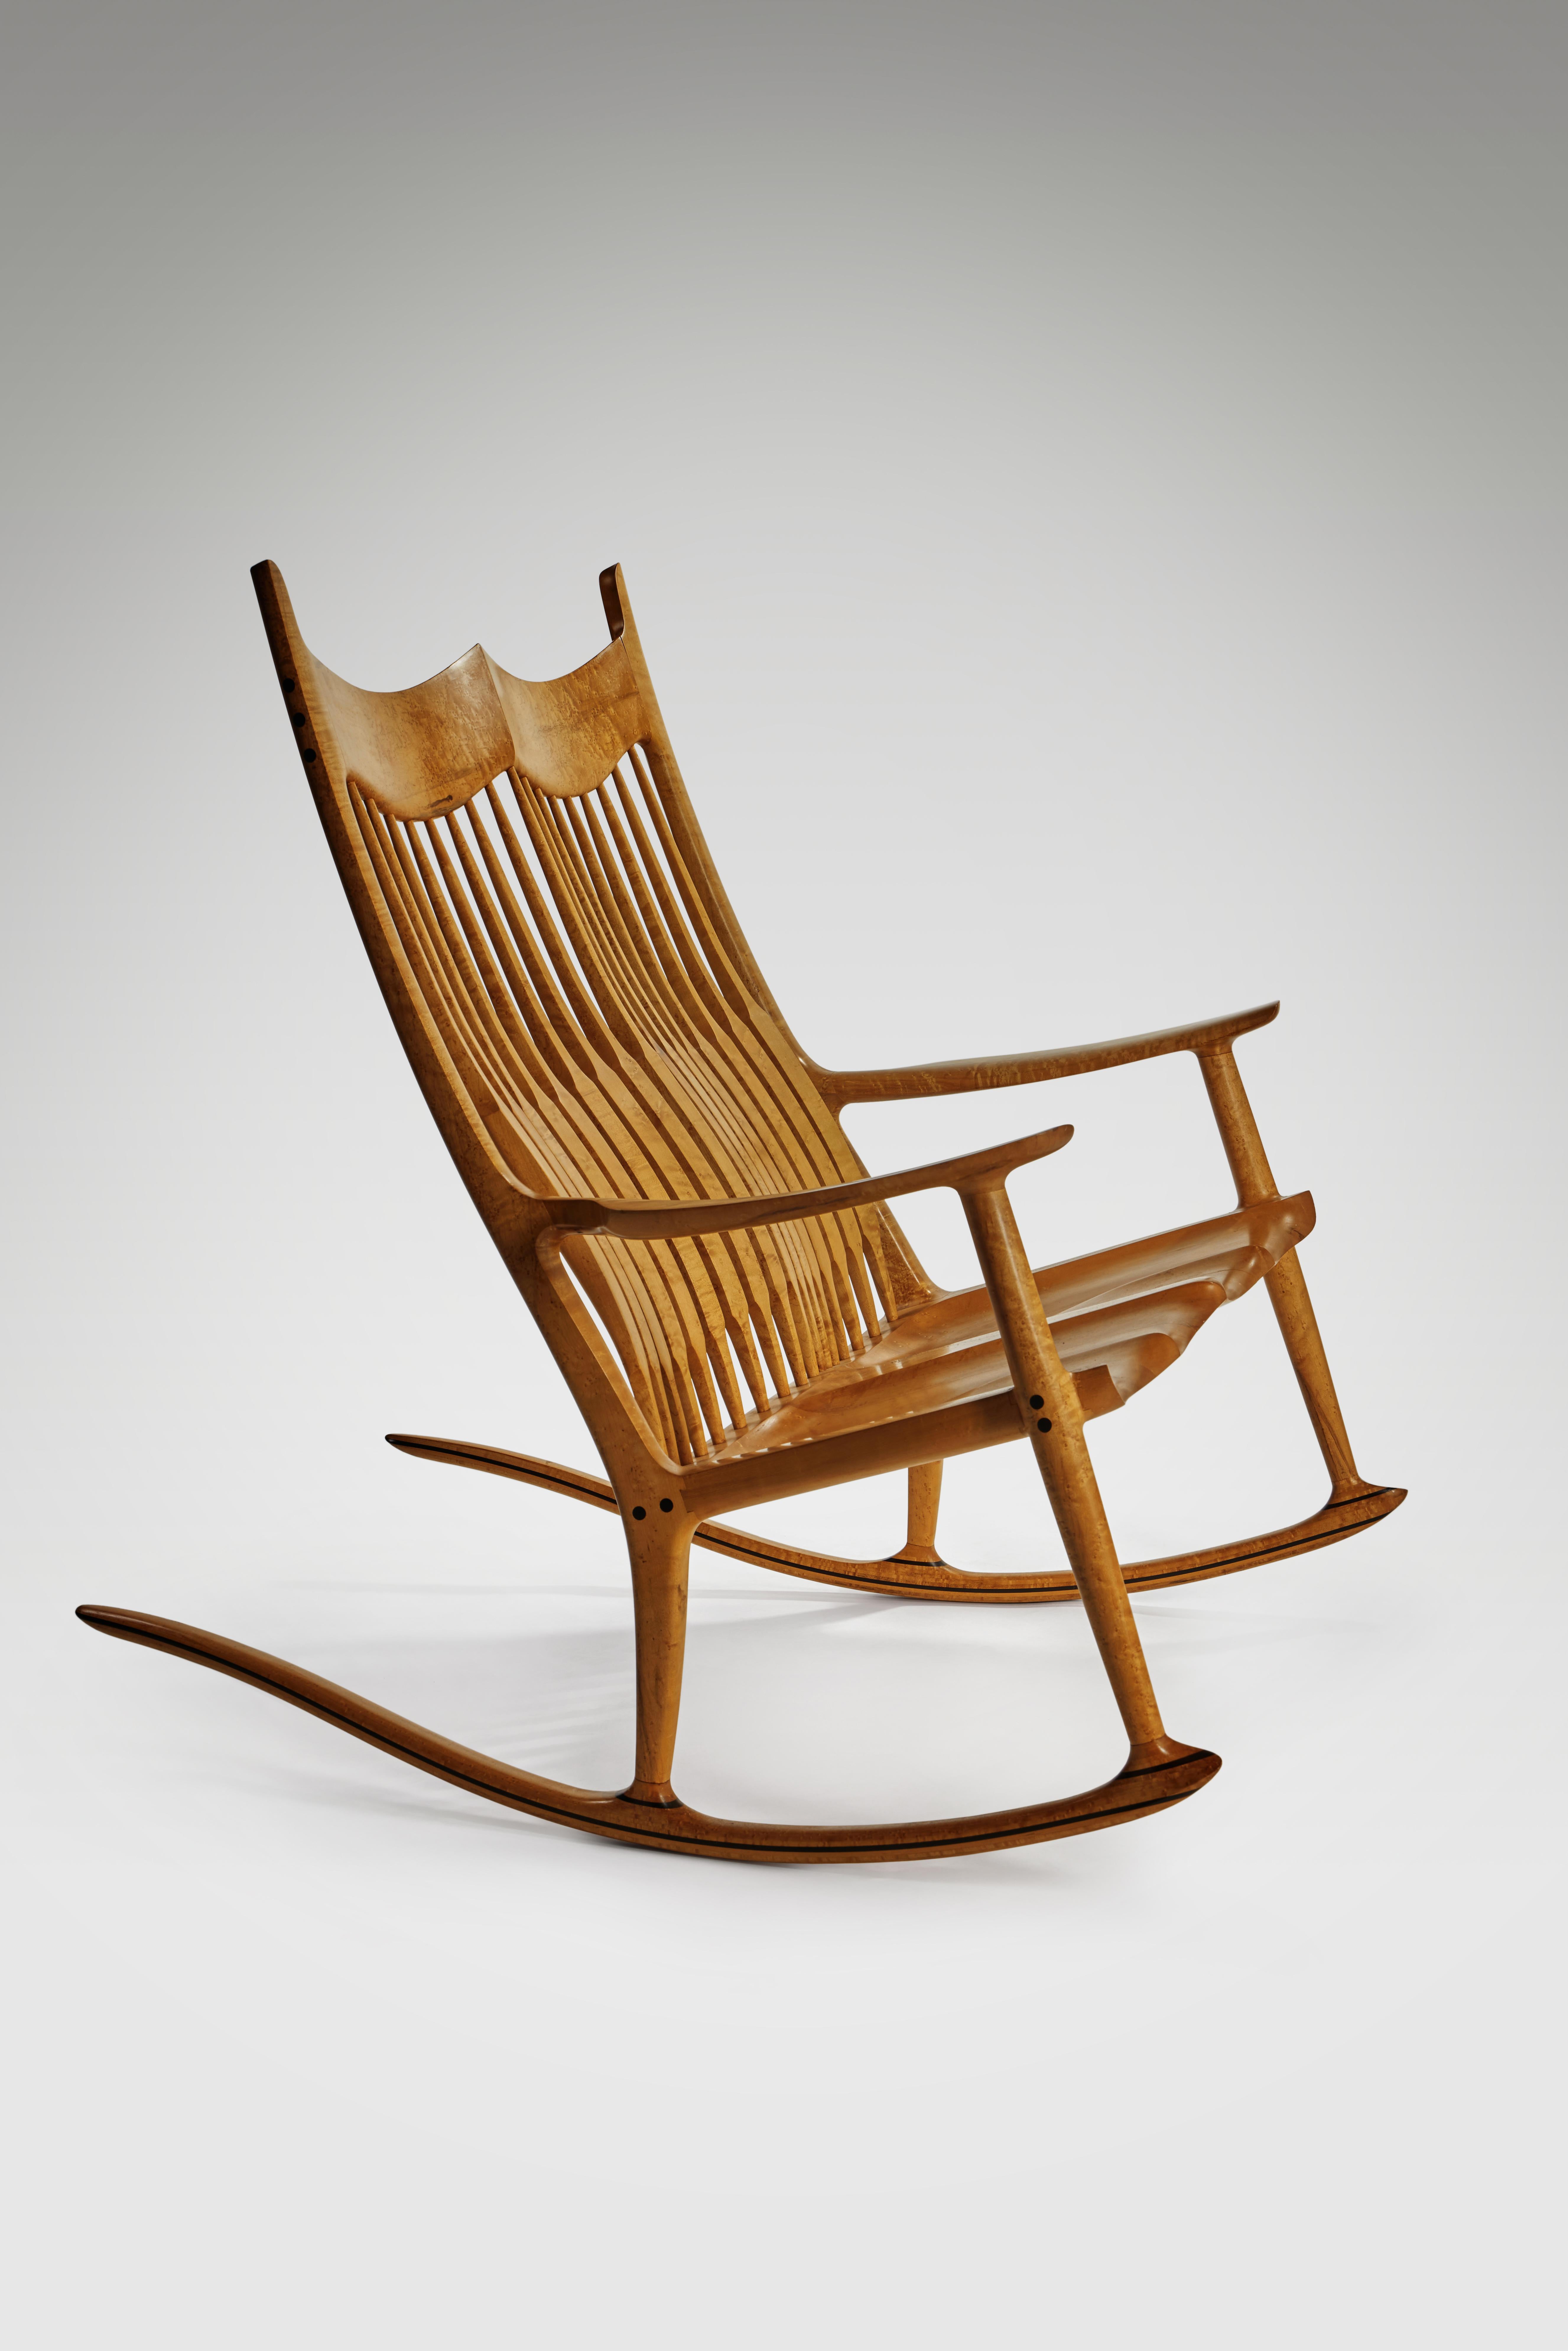 sam maloof rocking chair for sale